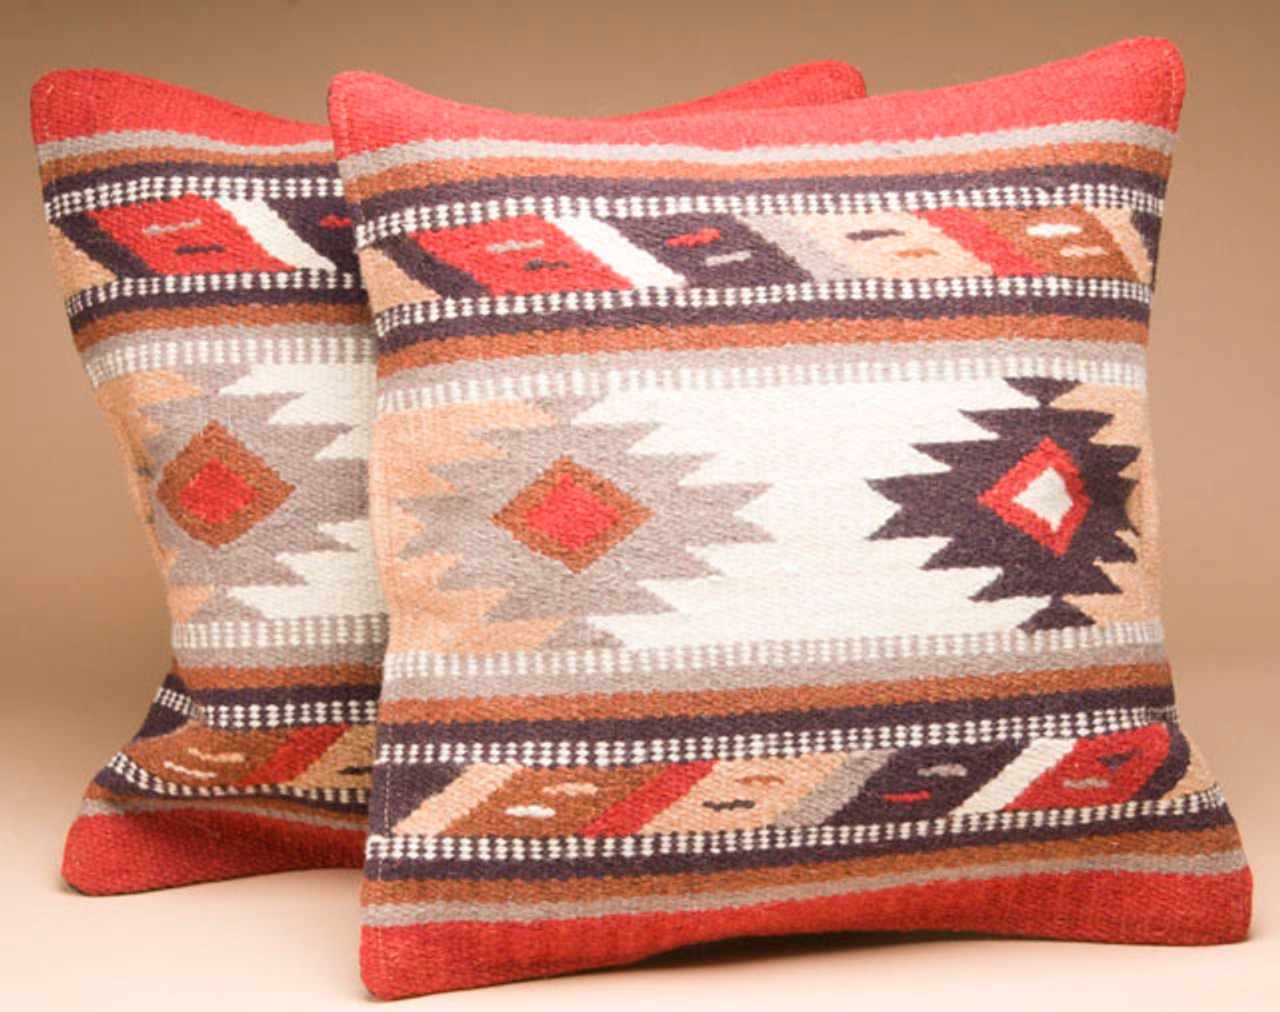 Pair -20 Pillow Inserts for 18x18 Pillow Covers - Mission Del Rey Southwest